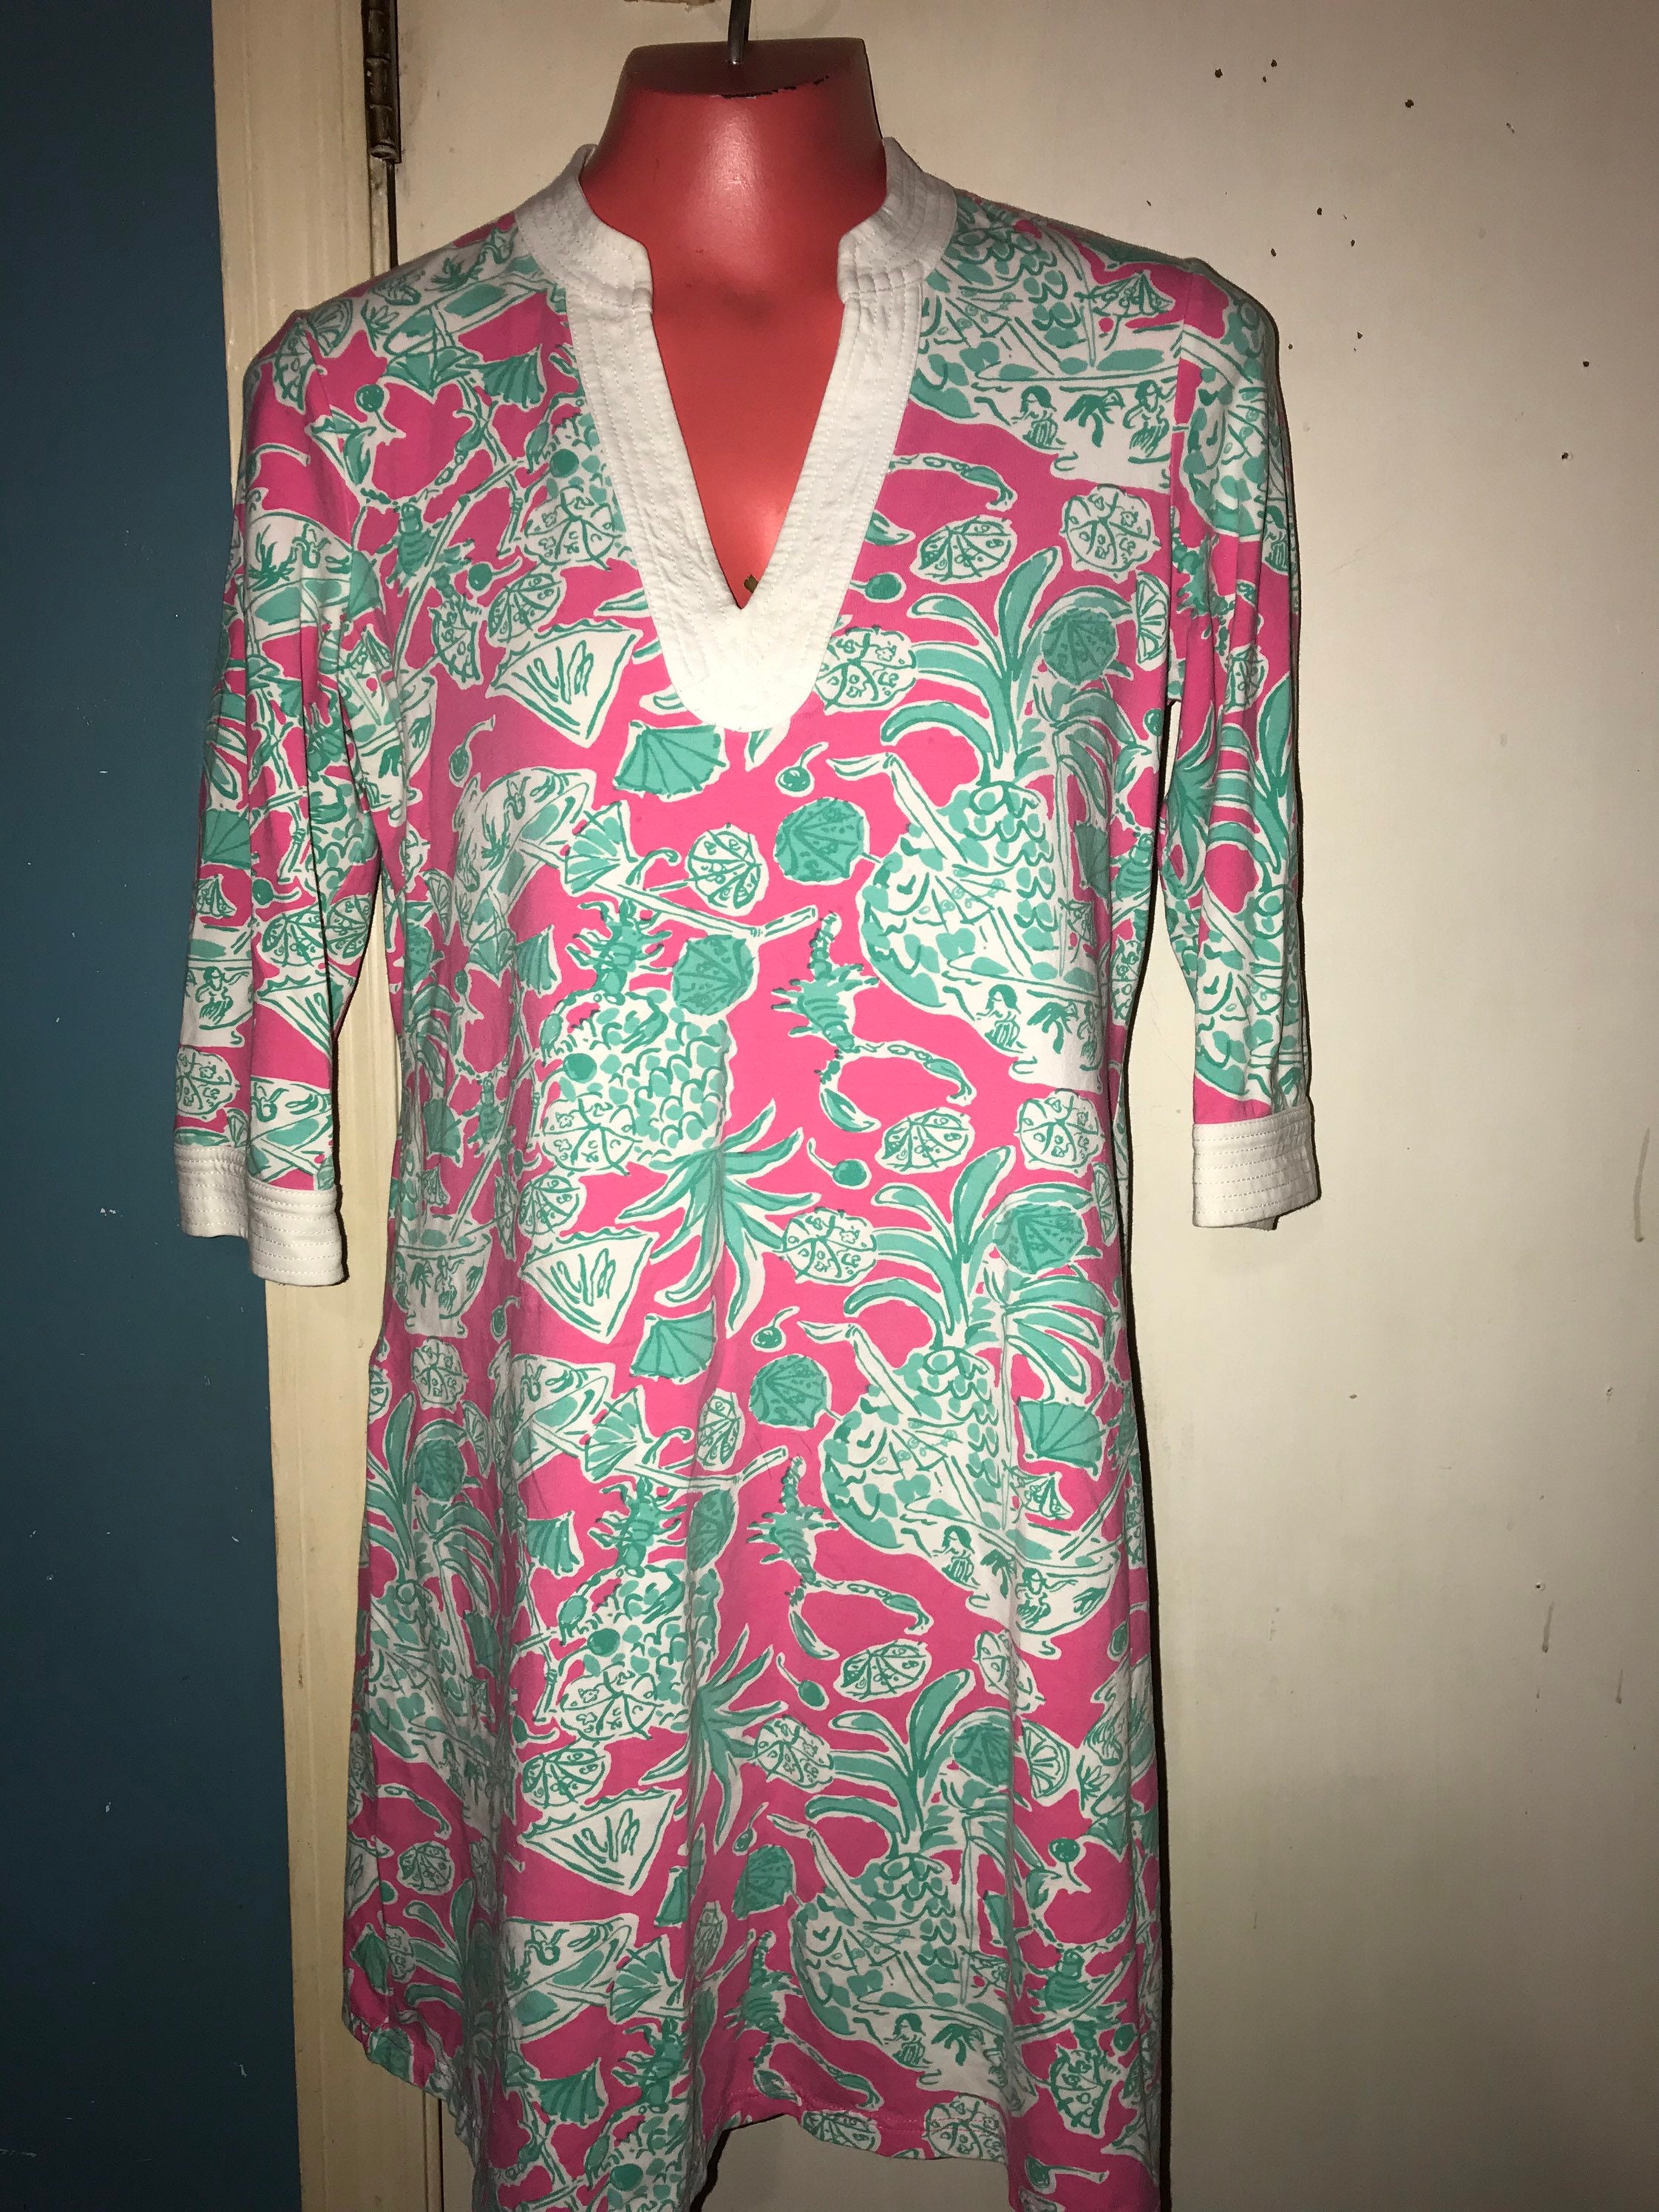 Vintage Lilly Pulitzer Dress. Lilly Pulitzer Stretch Dress. Lilly ...